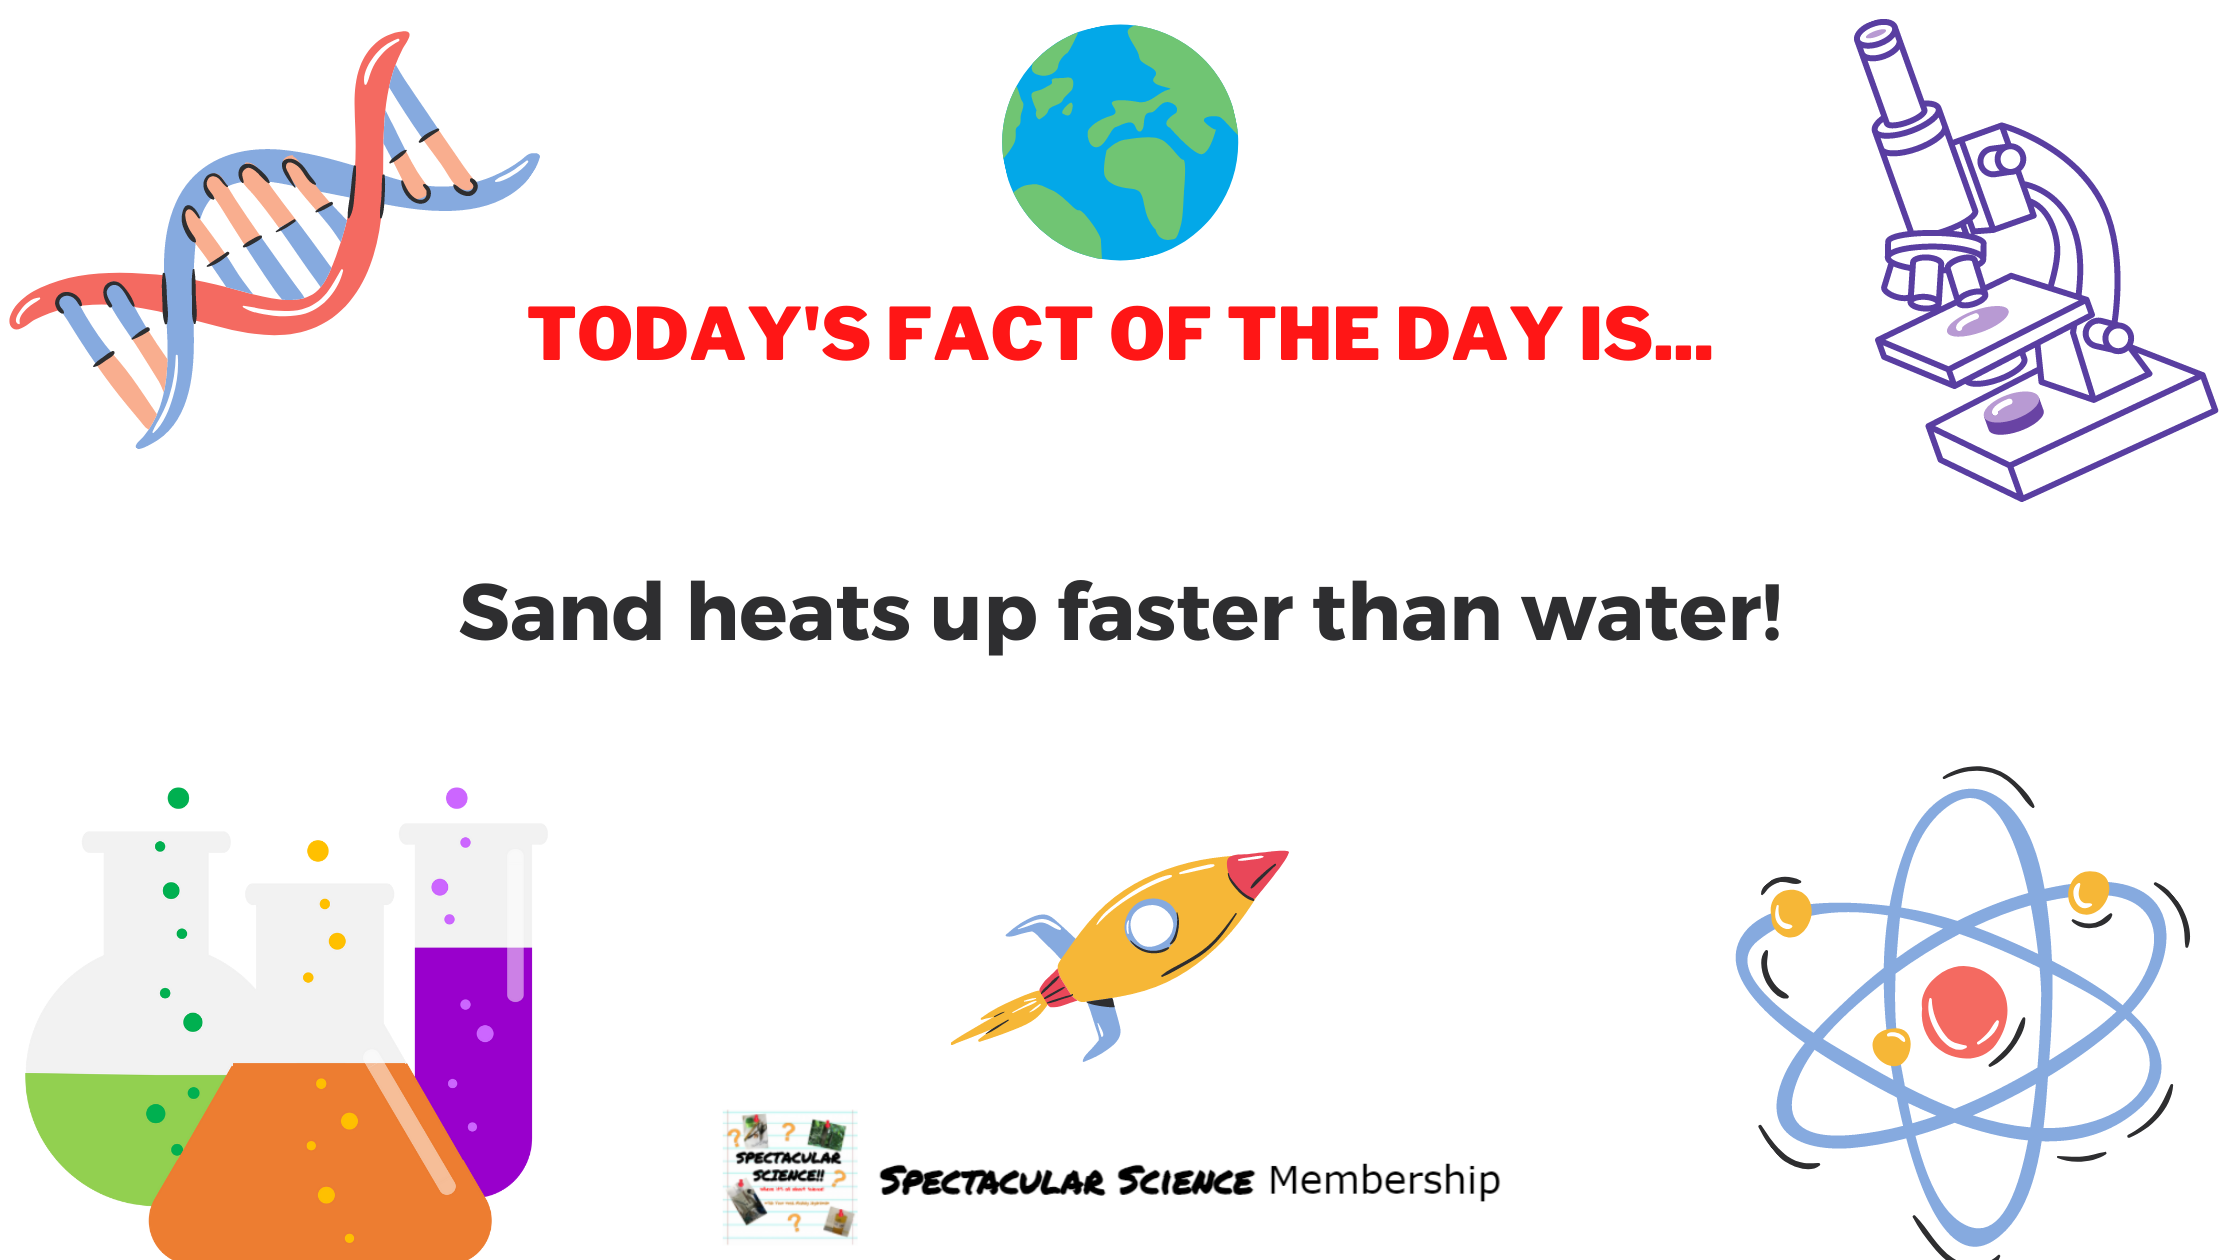 Fact of the Day Image Feb. 28th